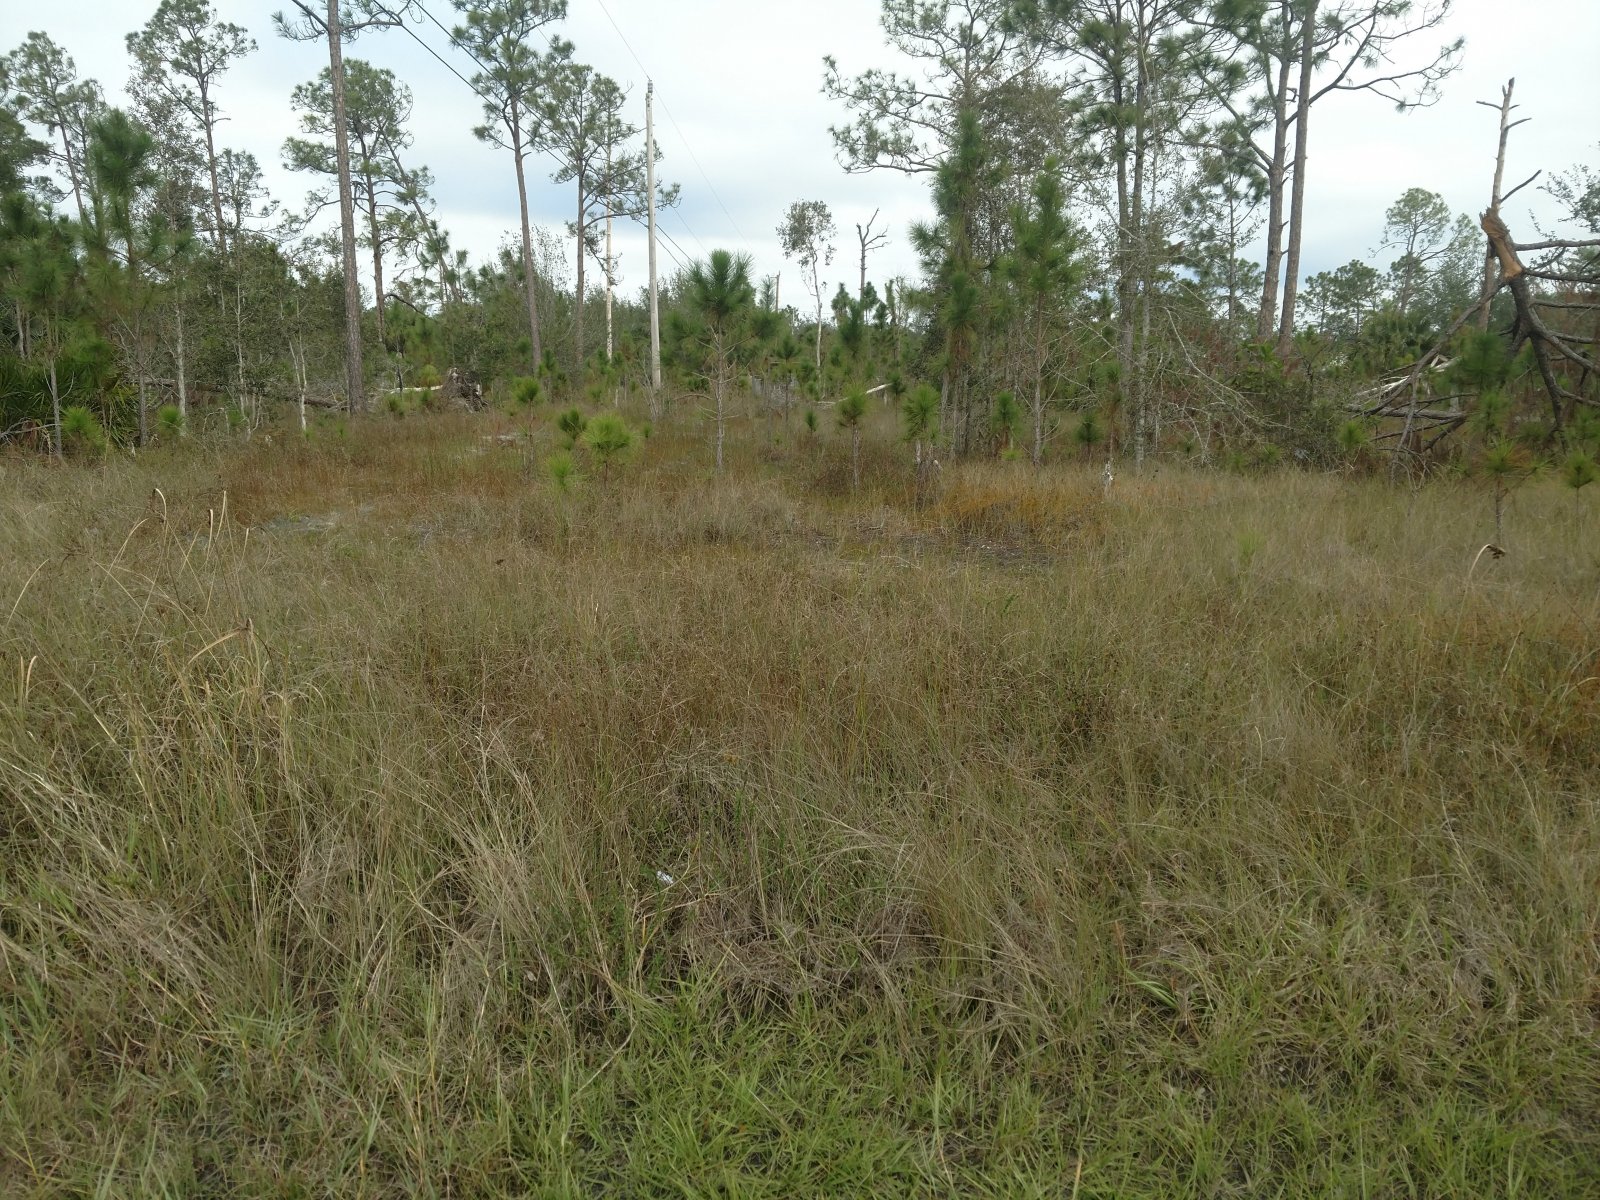 Buildable Lehigh Acres Lot Available Now!!!